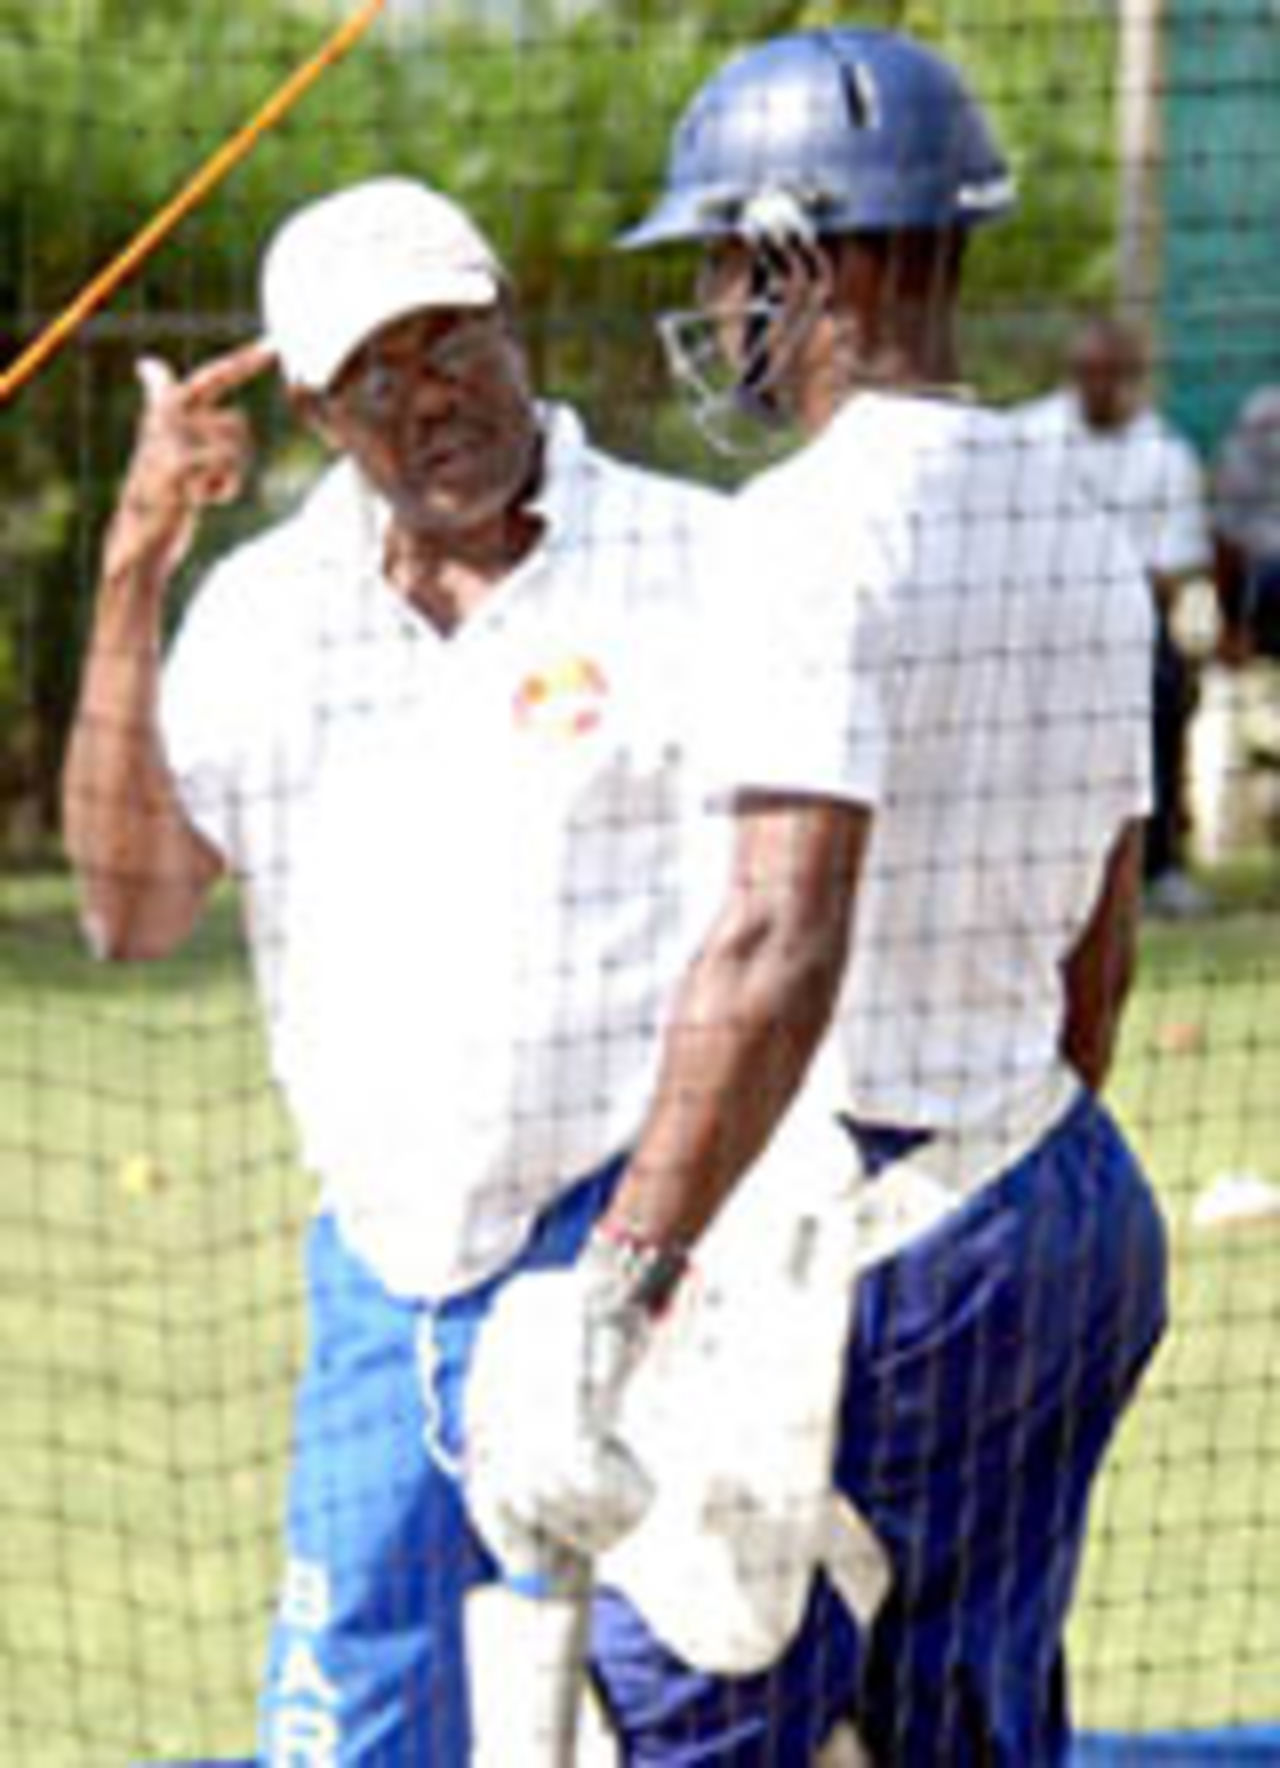 One of Barbados' and the West Indies' all-time batting greats was in the nets at Yorkshire Sports Club, Friendship, St Michael, yesterday, giving tips on the art of batting to current national cricketers. Cricket legend Seymour Nurse, dressed in blue Barbados track pants and white tee-shirt and still looking fairly fit for someone 73 years old, positioned himself behind the stumps so that he could detect any flaws in the batsmen's technique, Barbados, December 30, 2006